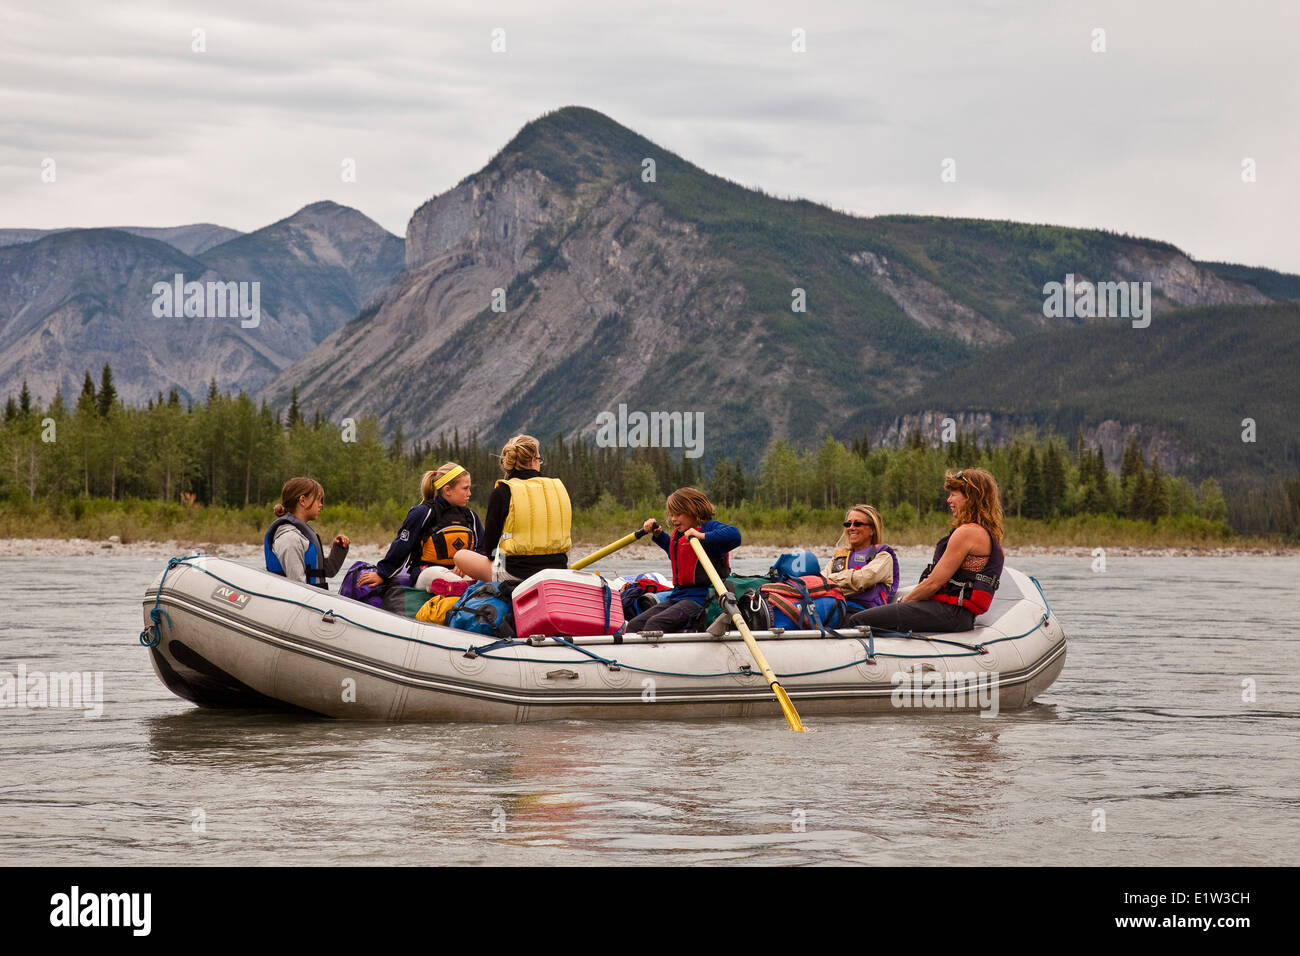 Young girl takes a turn on the oars of raft on Nahanni River, Nahanni National Park Preserve, NWT, Canada. Stock Photo